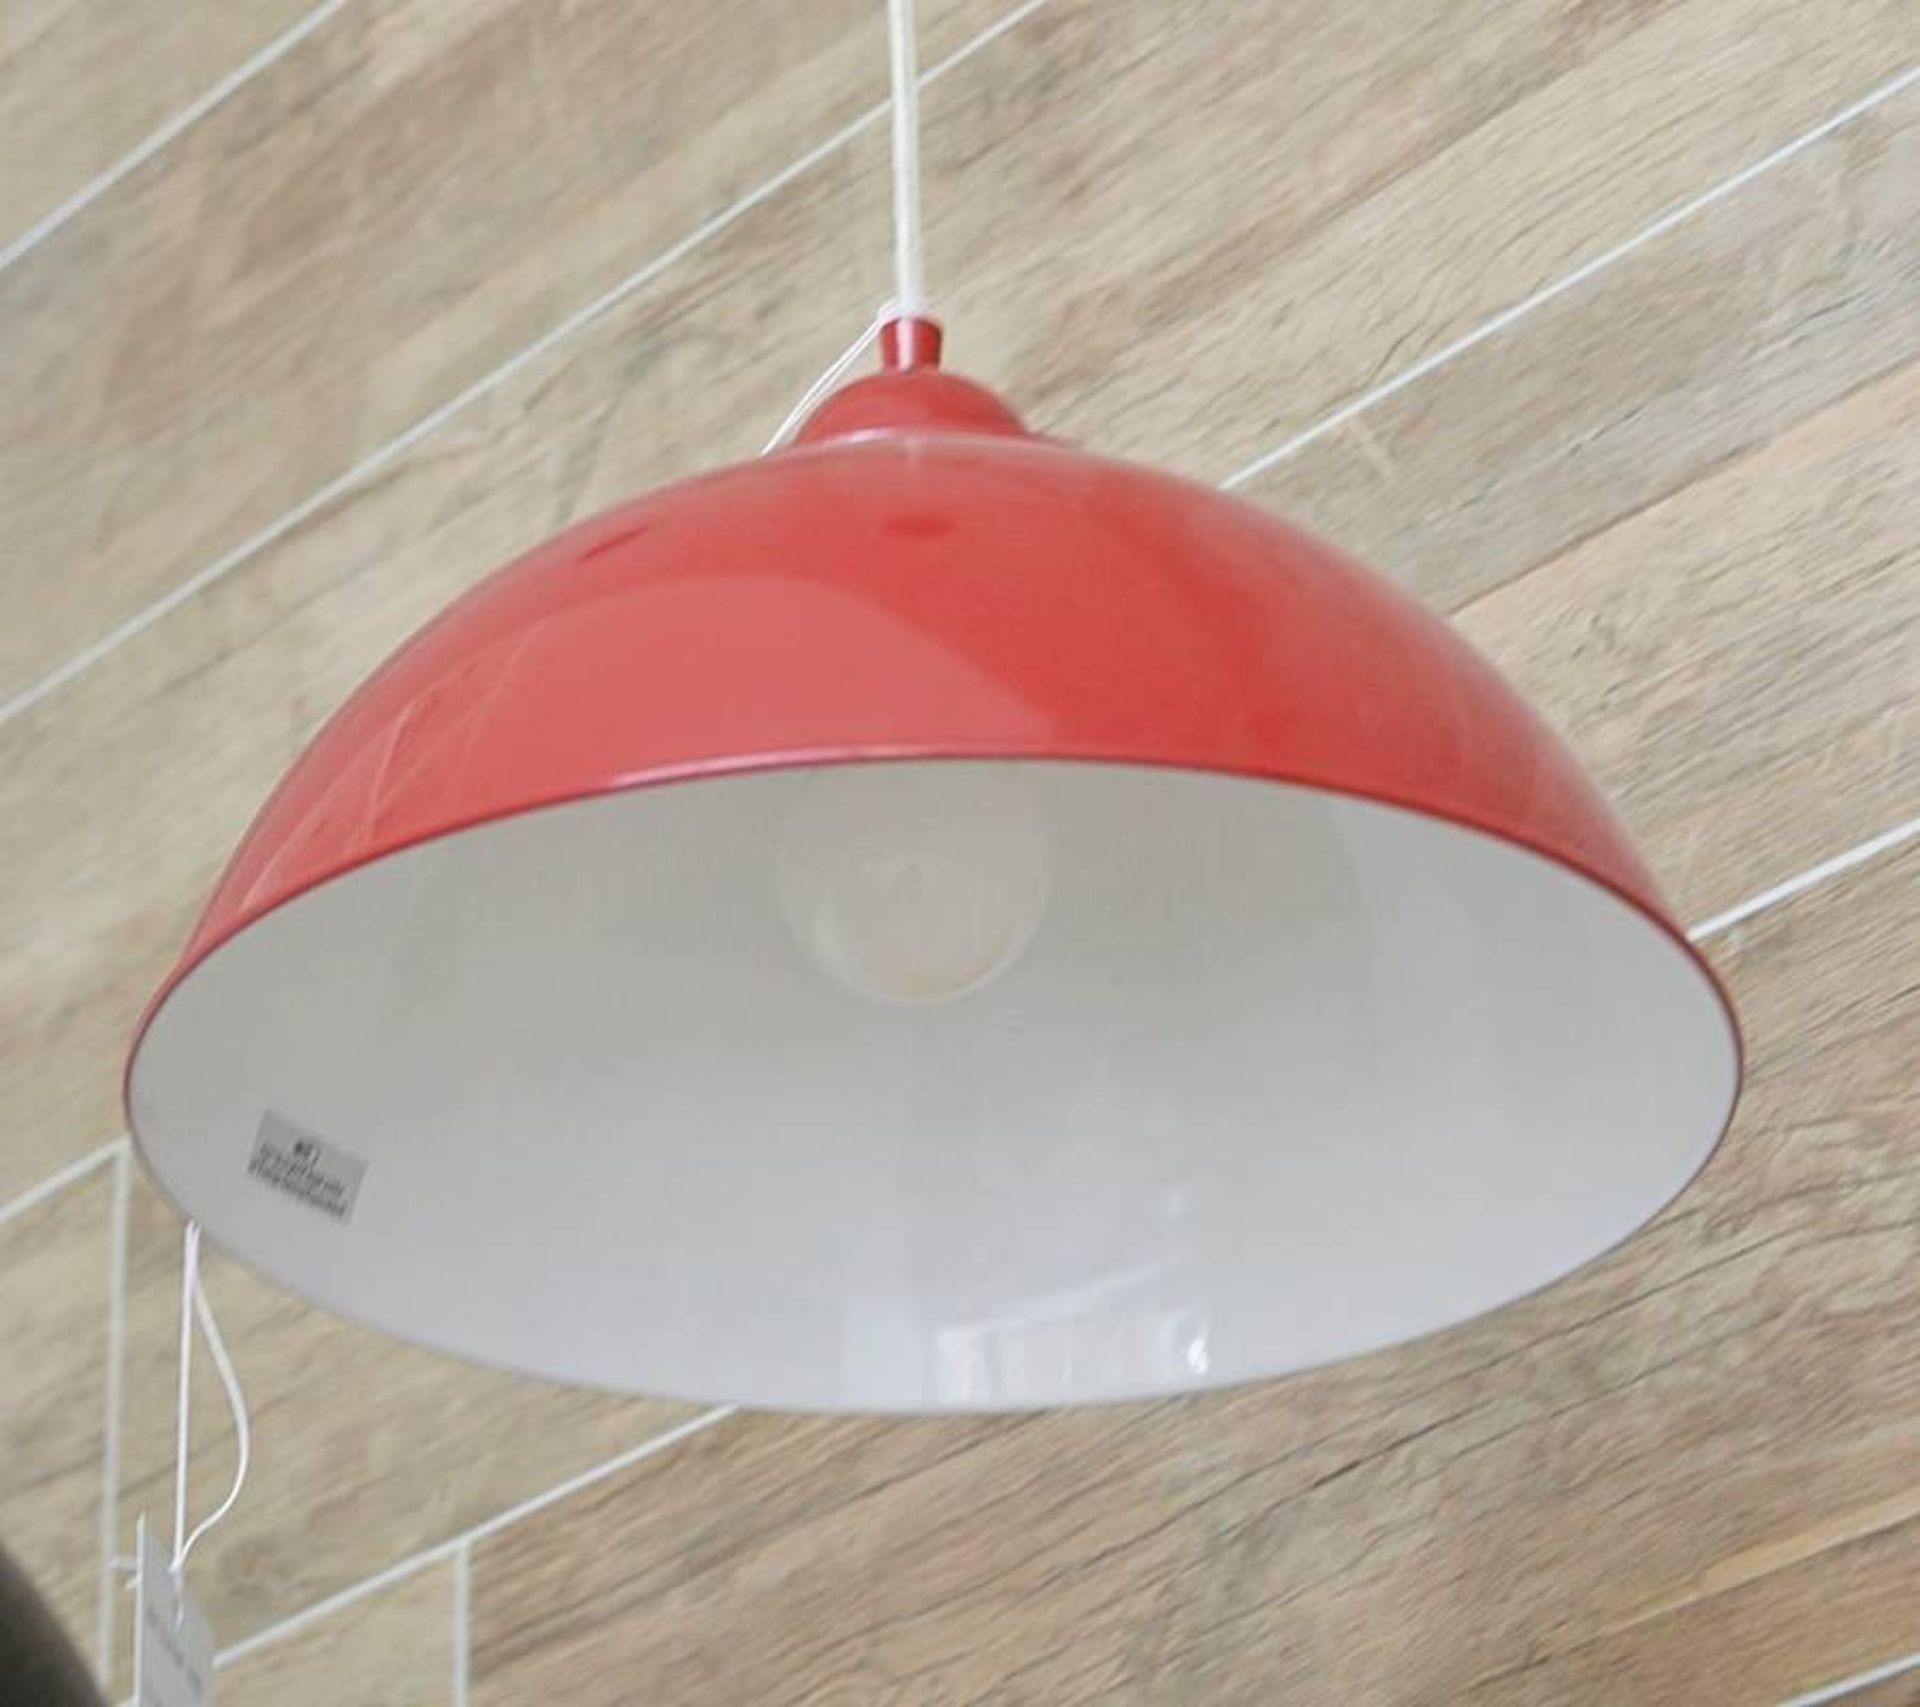 1 x SANFORD Red Half Dome Metal Pendant Light With White Inner - 34cm Diameter - New Boxed Stock - C - Image 4 of 4